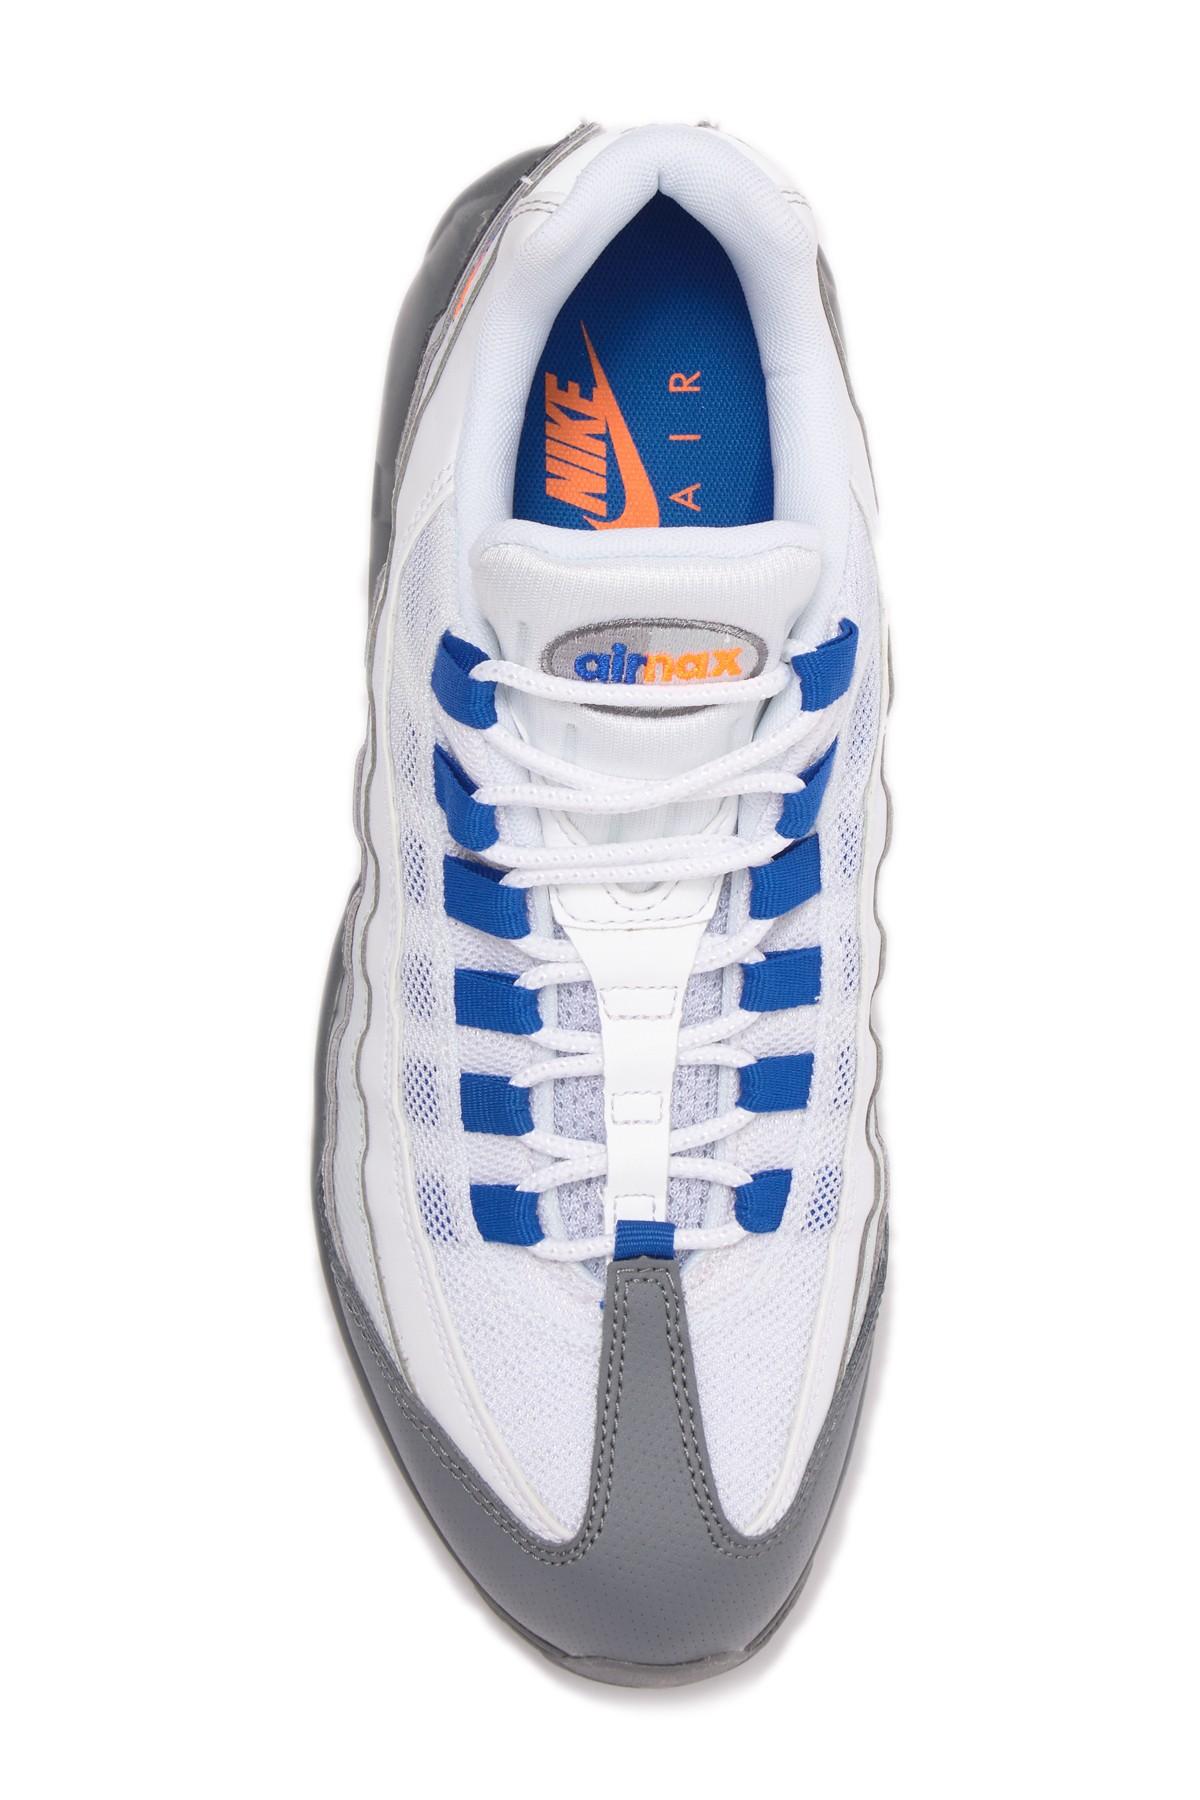 Nike Air Max 95 Essential 'ny Mets' Shoes - Size 9 for Men | Lyst